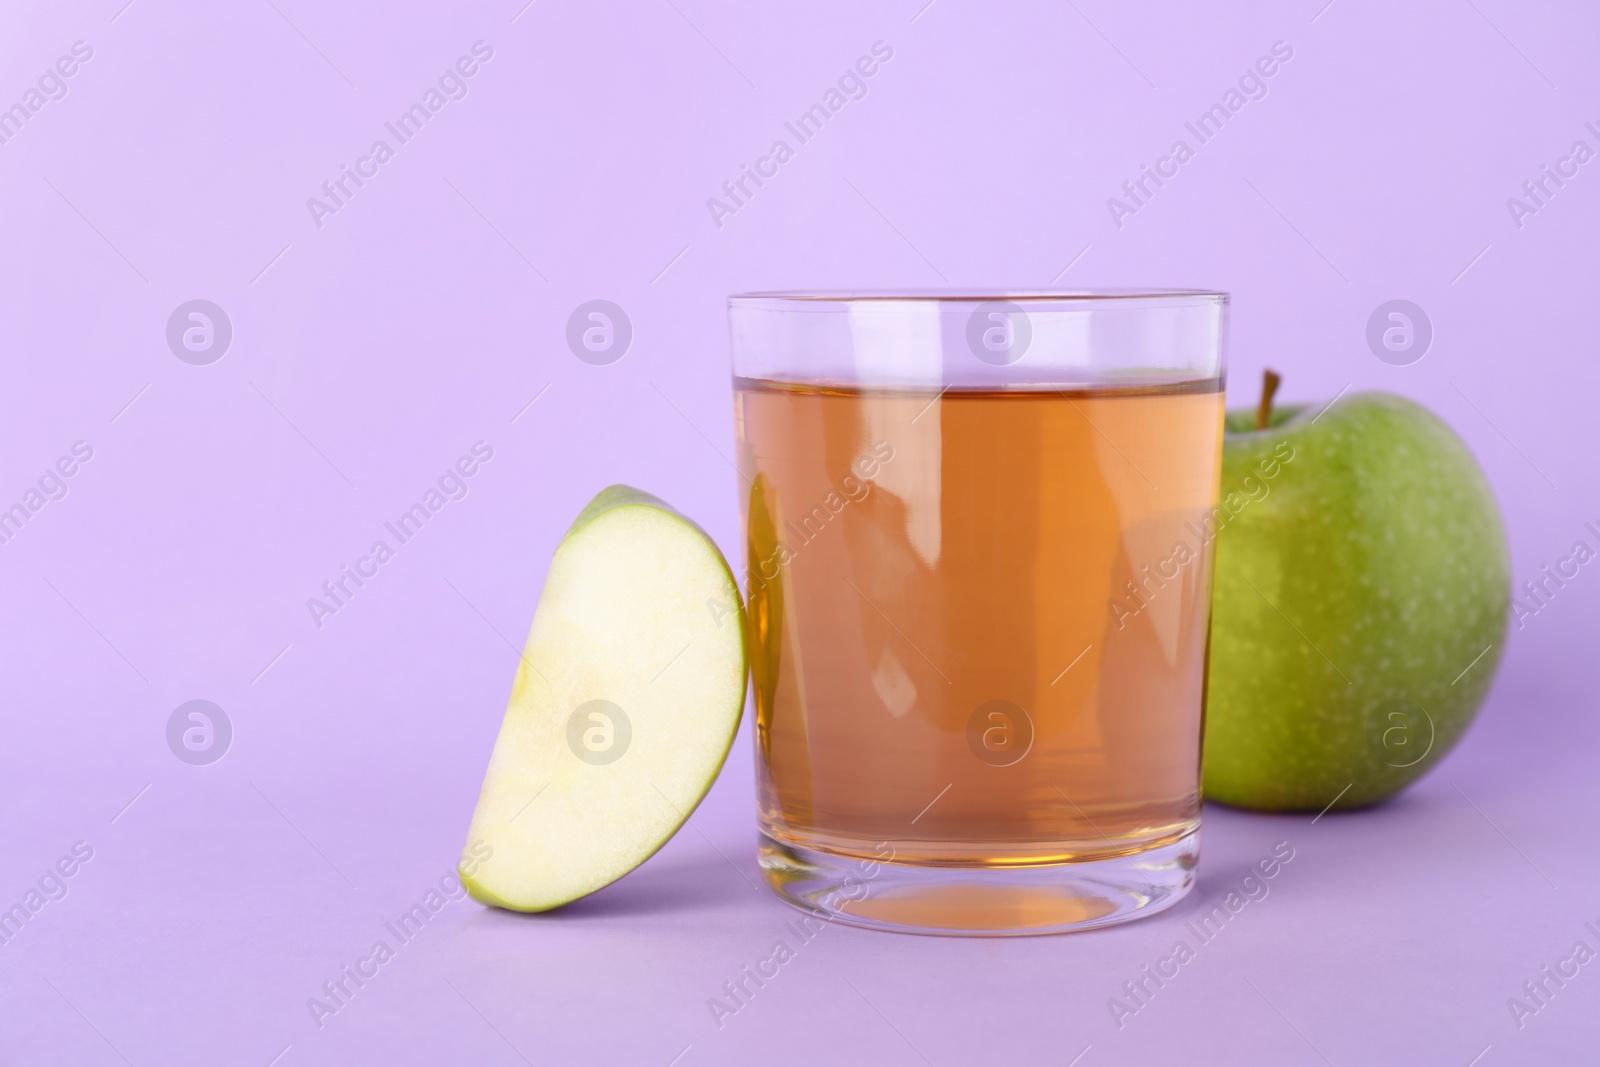 Photo of Glass of juice and apples on violet background